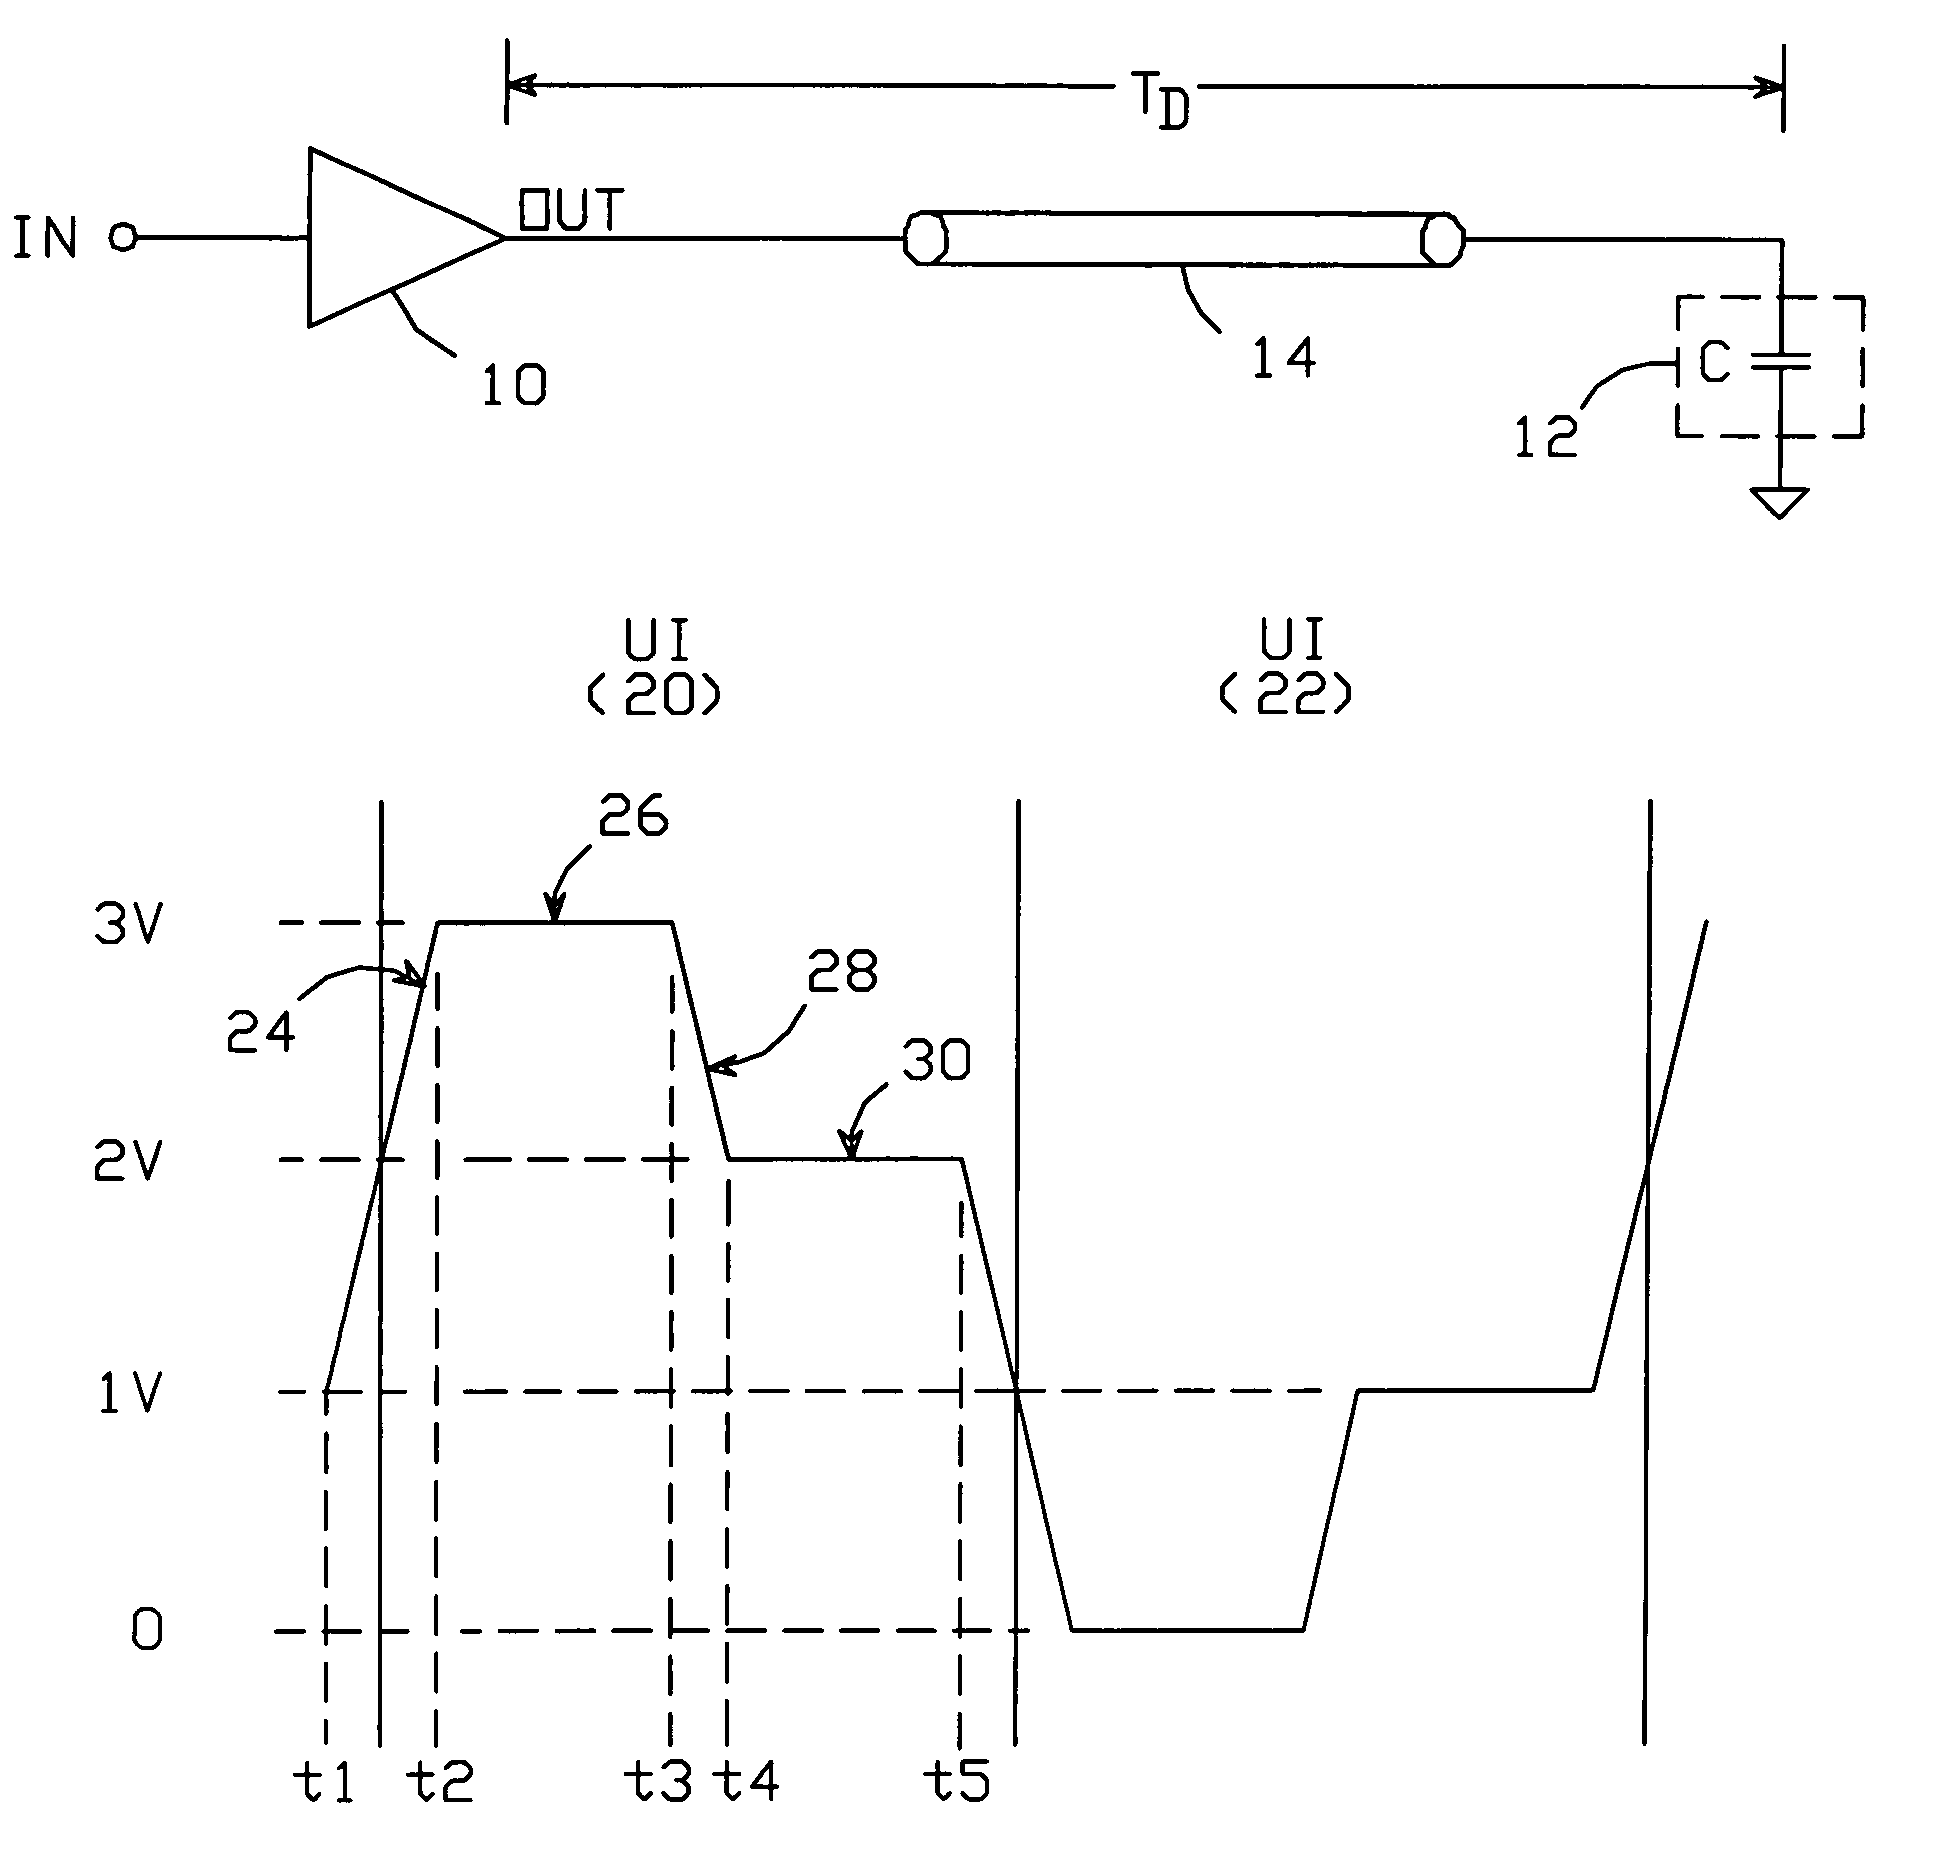 Output buffer with time varying source impedance for driving capacitively-terminated transmission lines